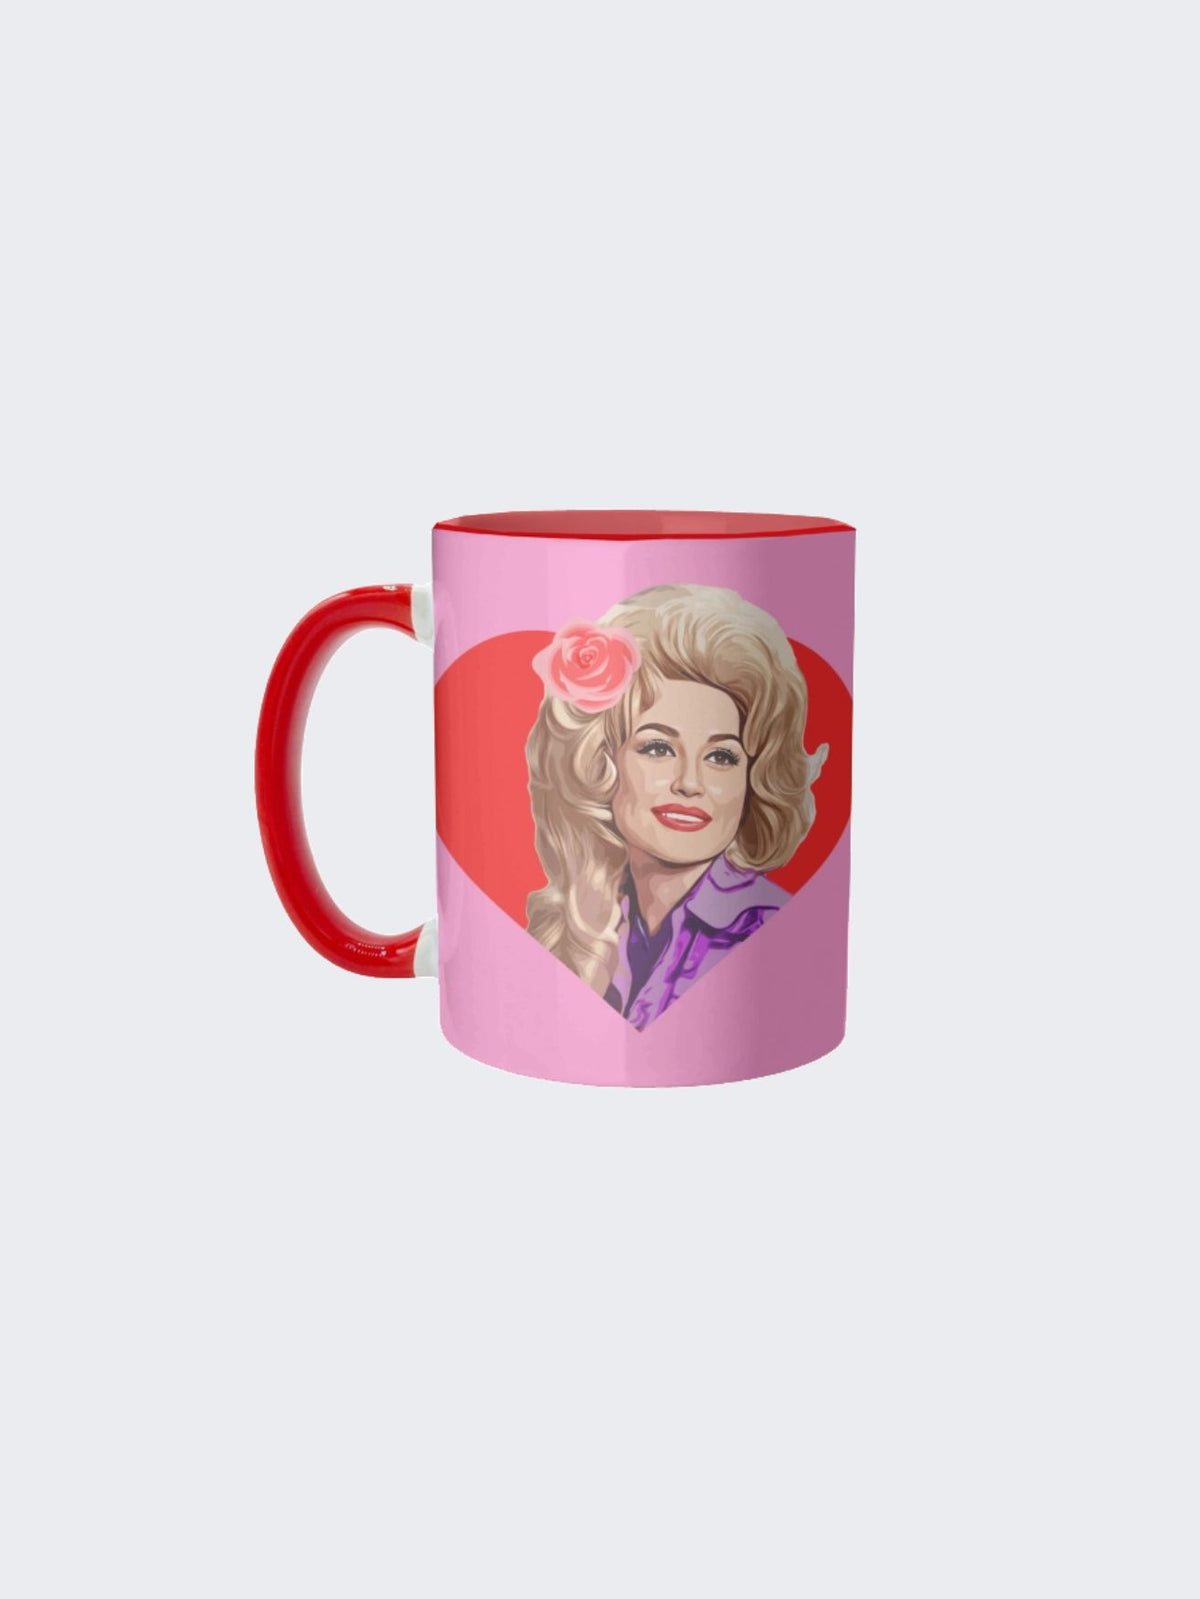 dolly parton in red heart coffee mug